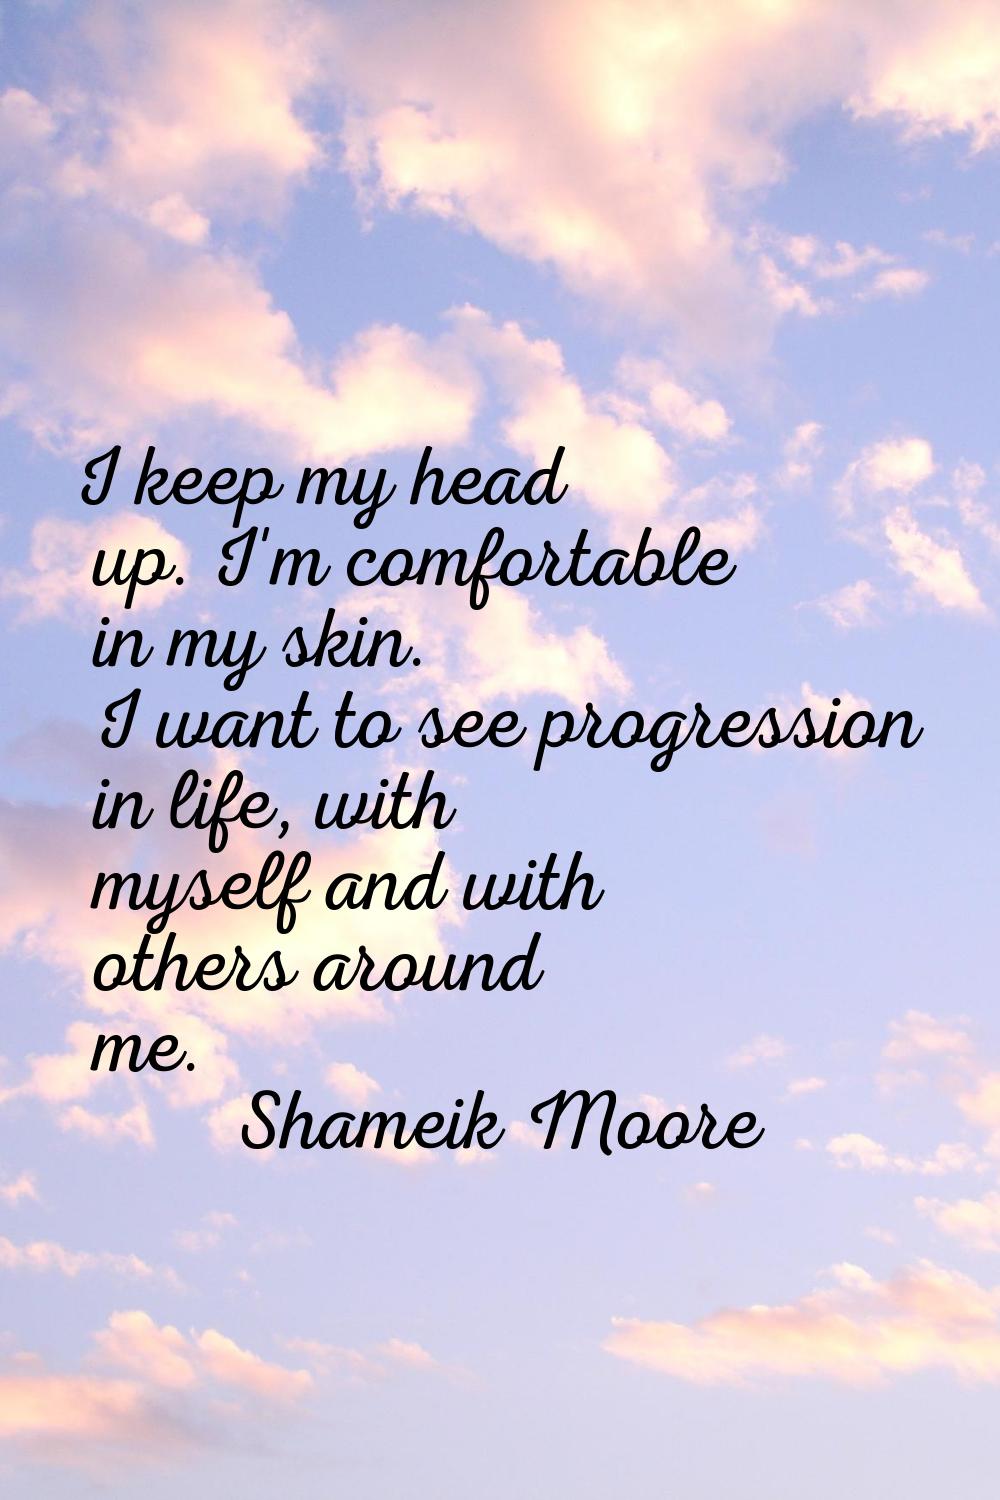 I keep my head up. I'm comfortable in my skin. I want to see progression in life, with myself and w